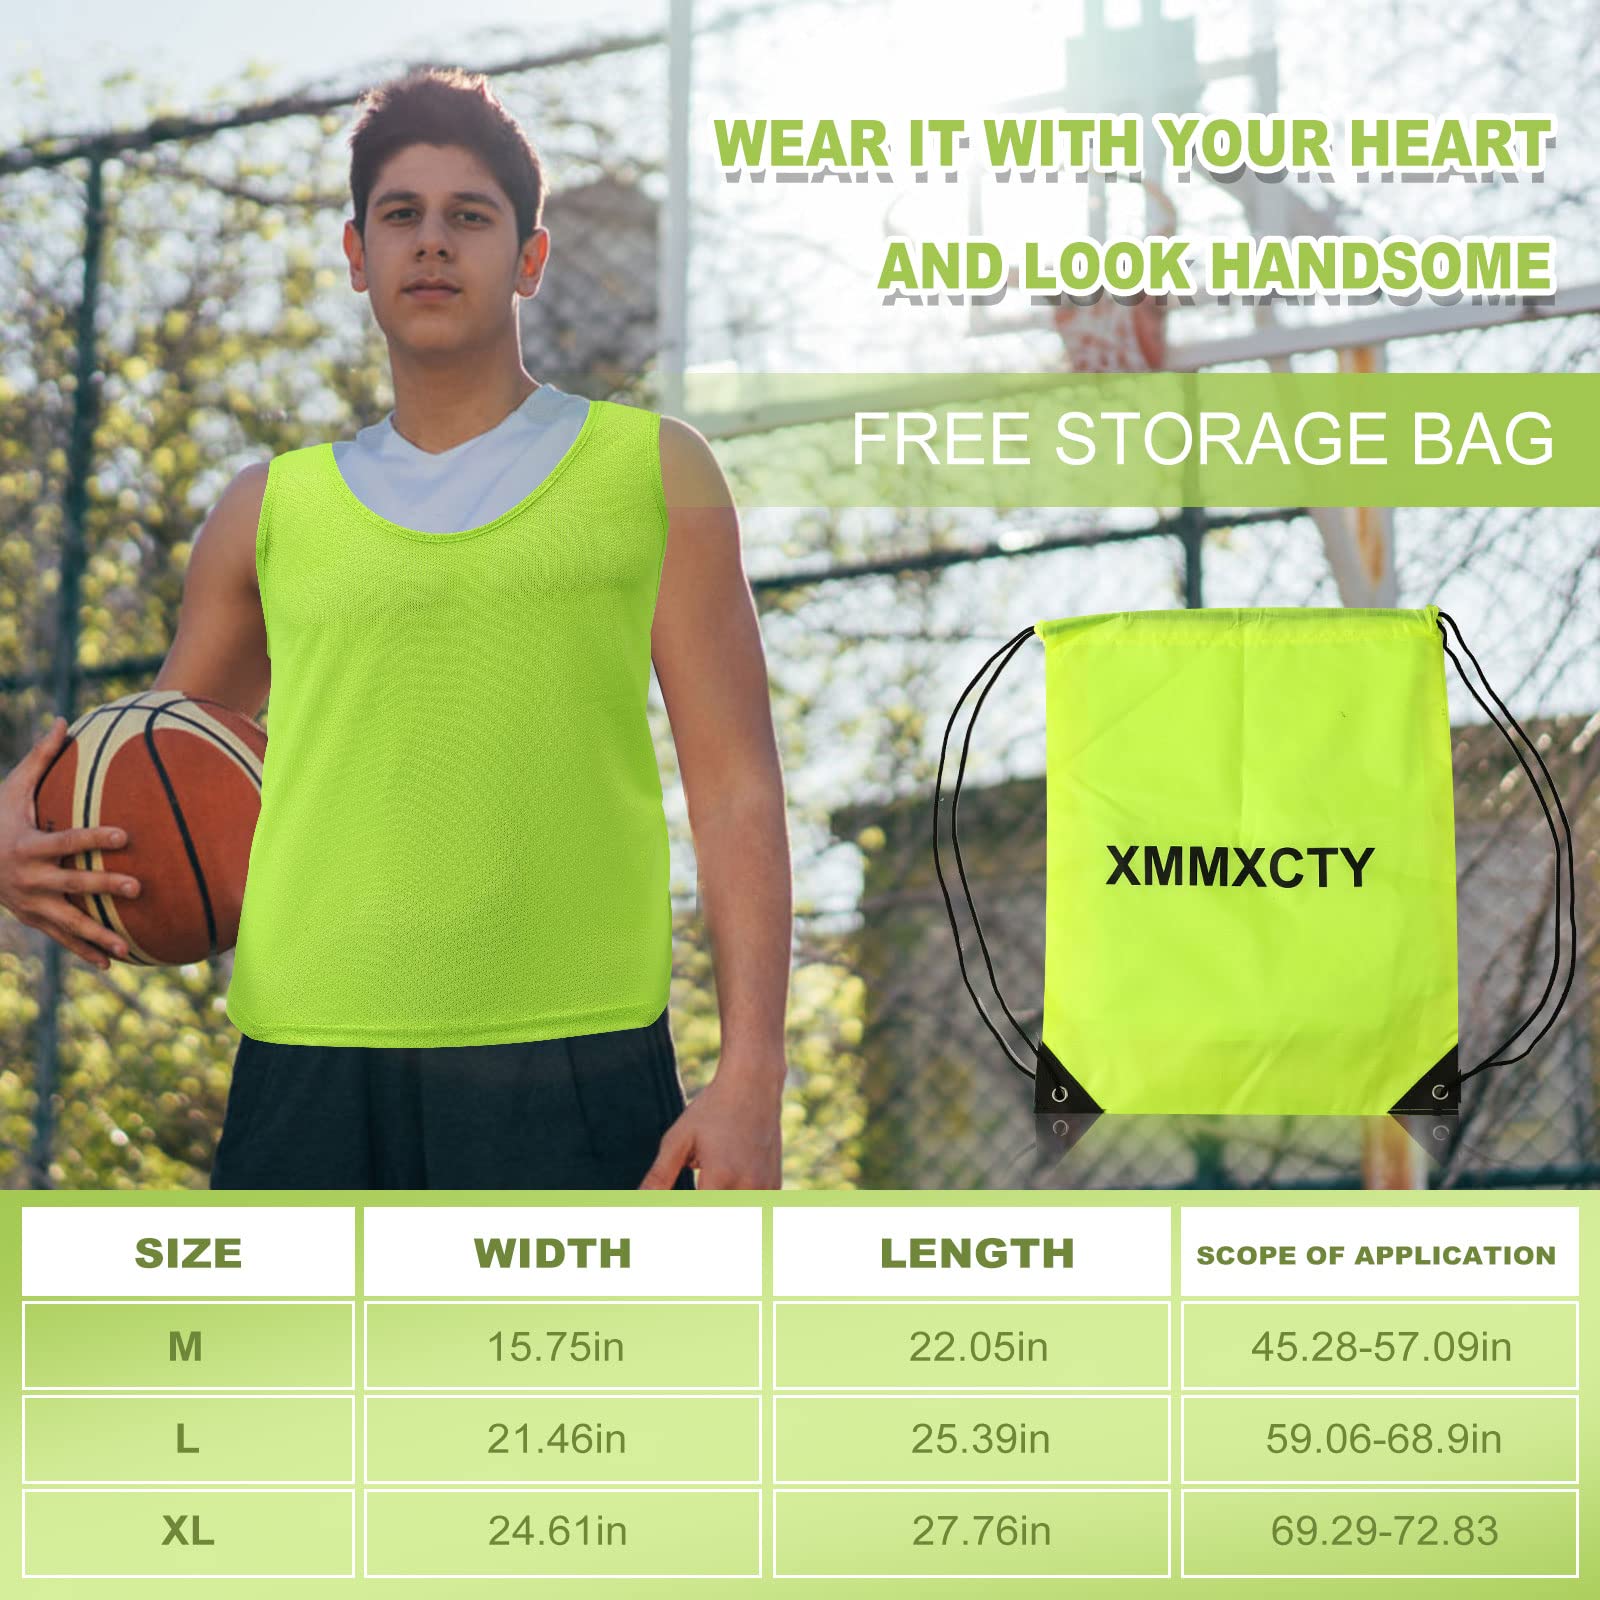 XMMXCTY Numbered Vest (12 Pieces)/Sport Pinnies/Mesh Scrimmage Jersey for Children Youth Sports Basketball, Soccer, Baseball